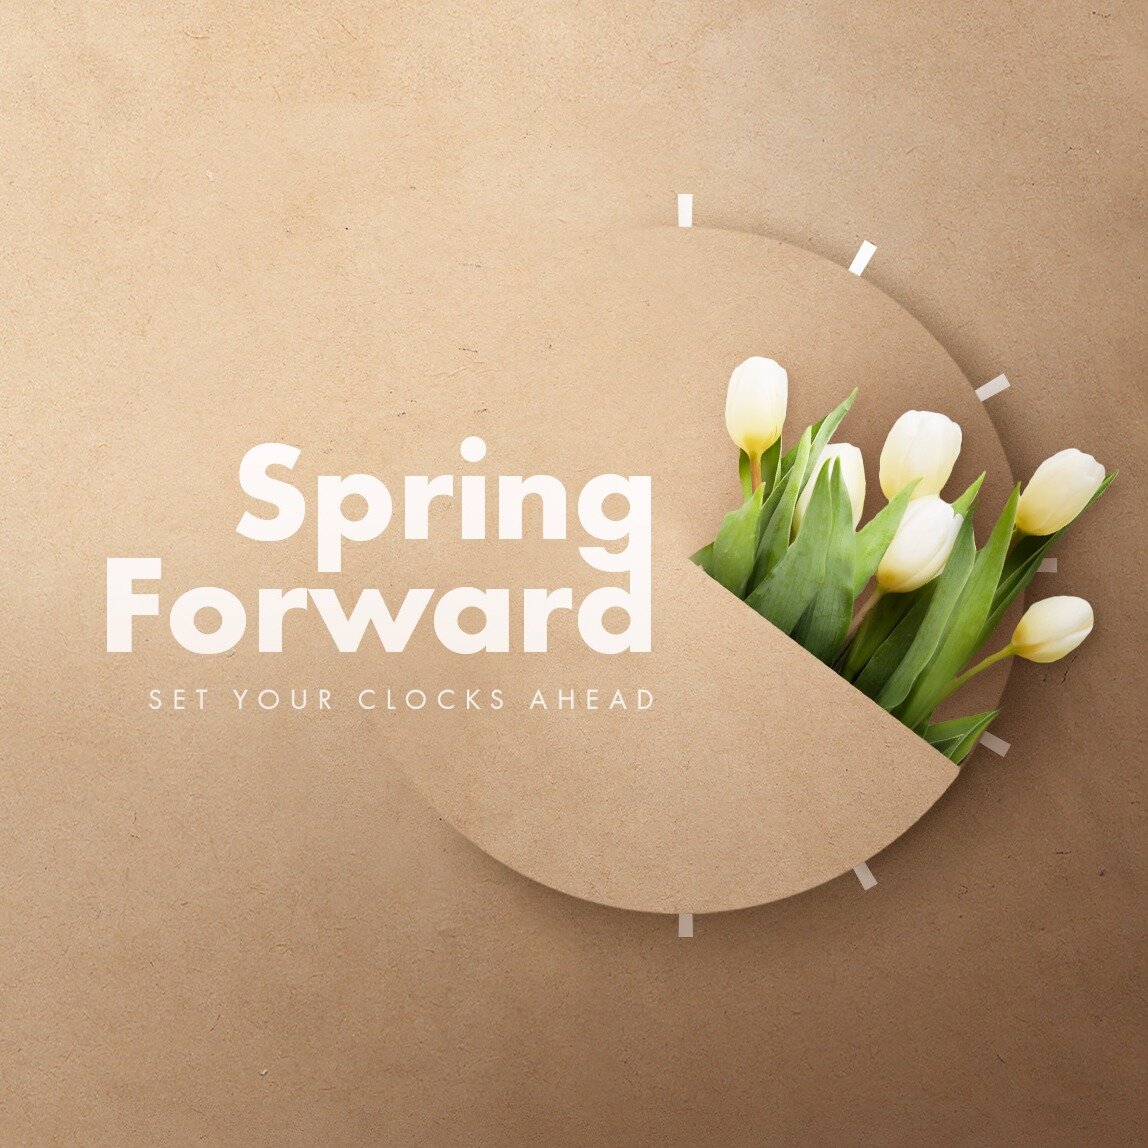 Great news! As the clocks go forward tonight, you get to come to our resurrection Sunday services an hour sooner. 

We really cannot wait to see you at church tomorrow! 

www.thewellchurch.org.uk/visit